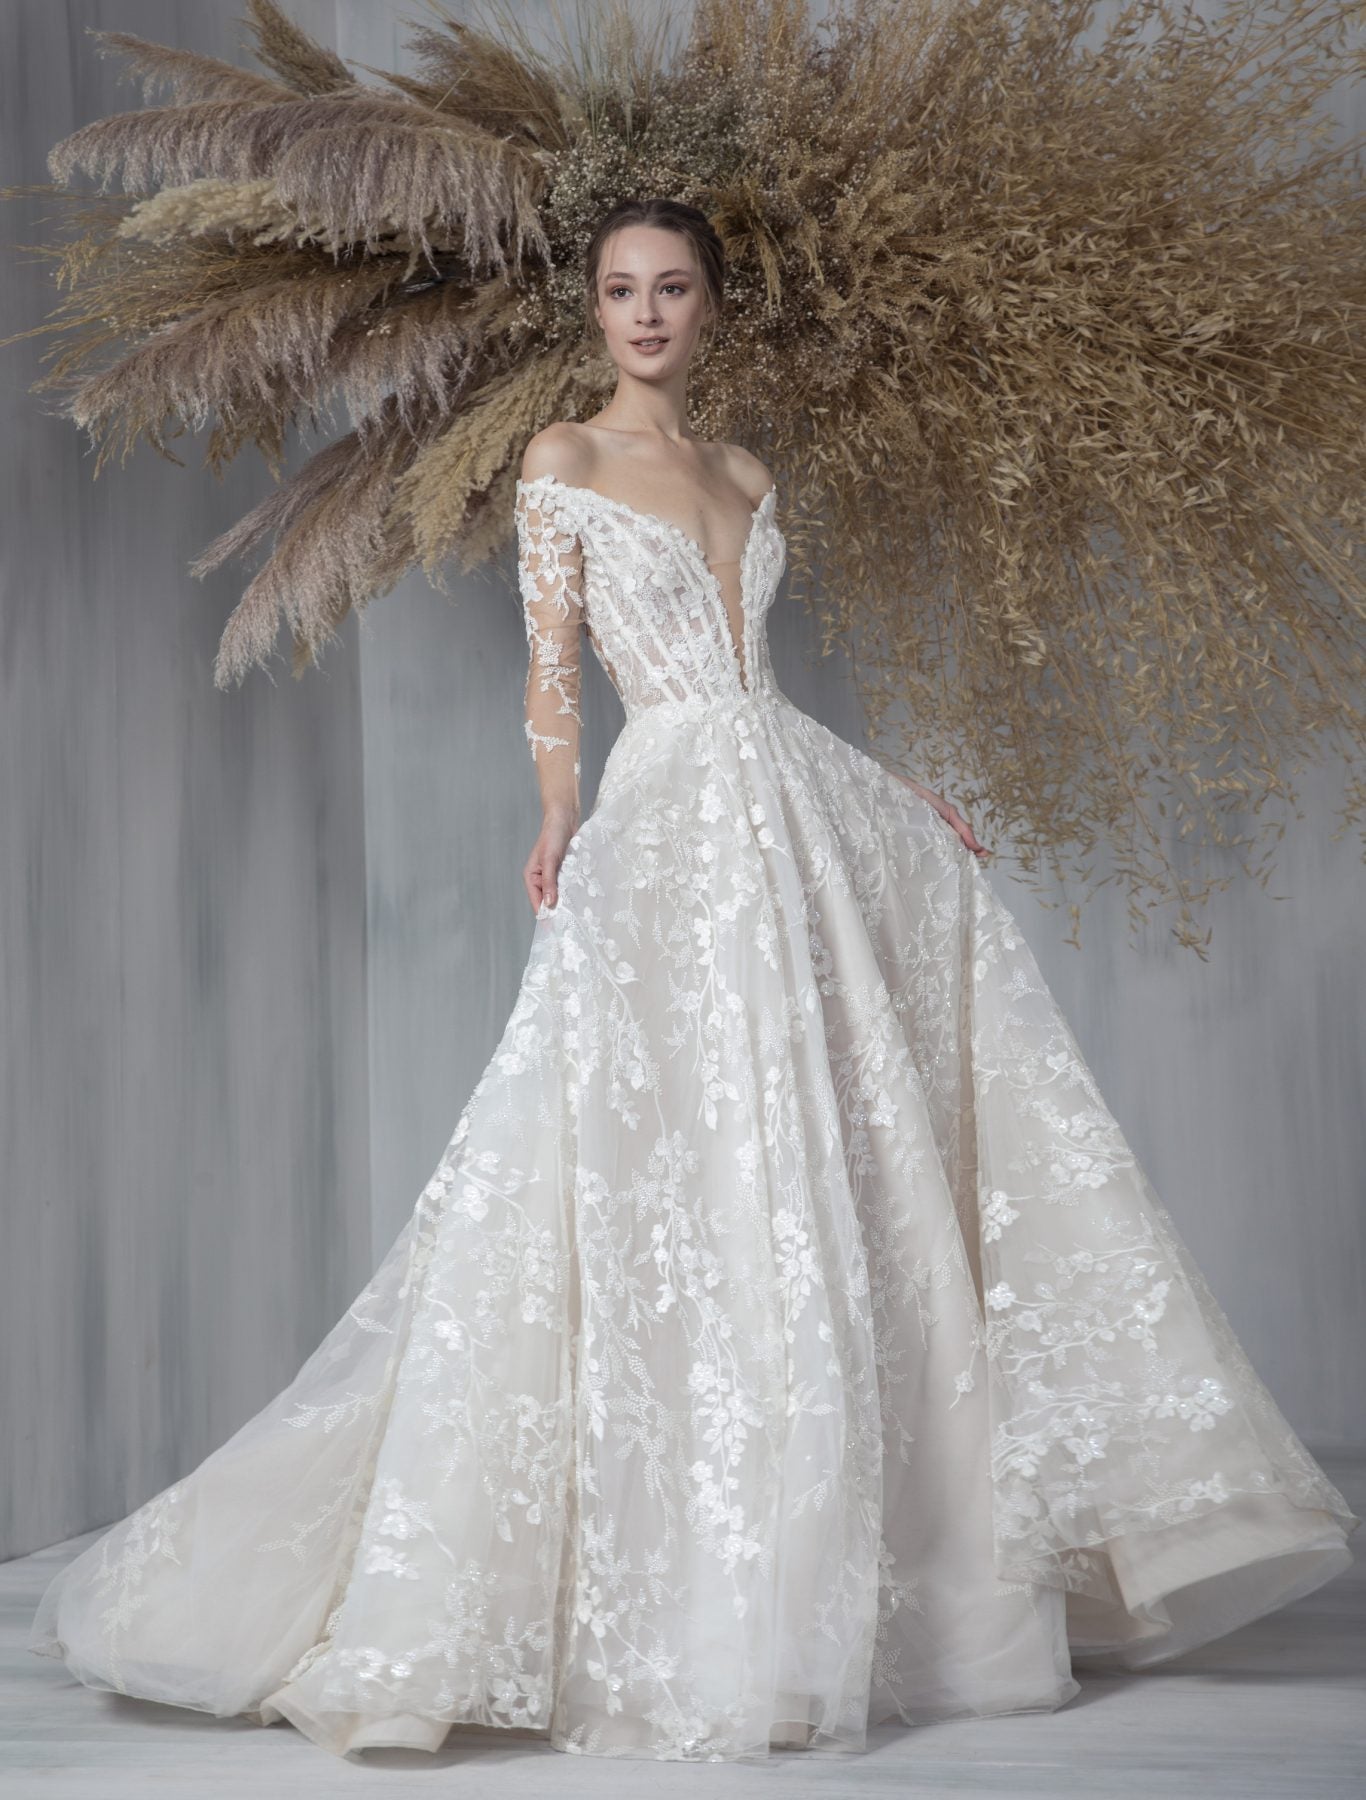 Long Sleeve Embroidered Ball Gown Wedding Dress | Kleinfeld Bridal